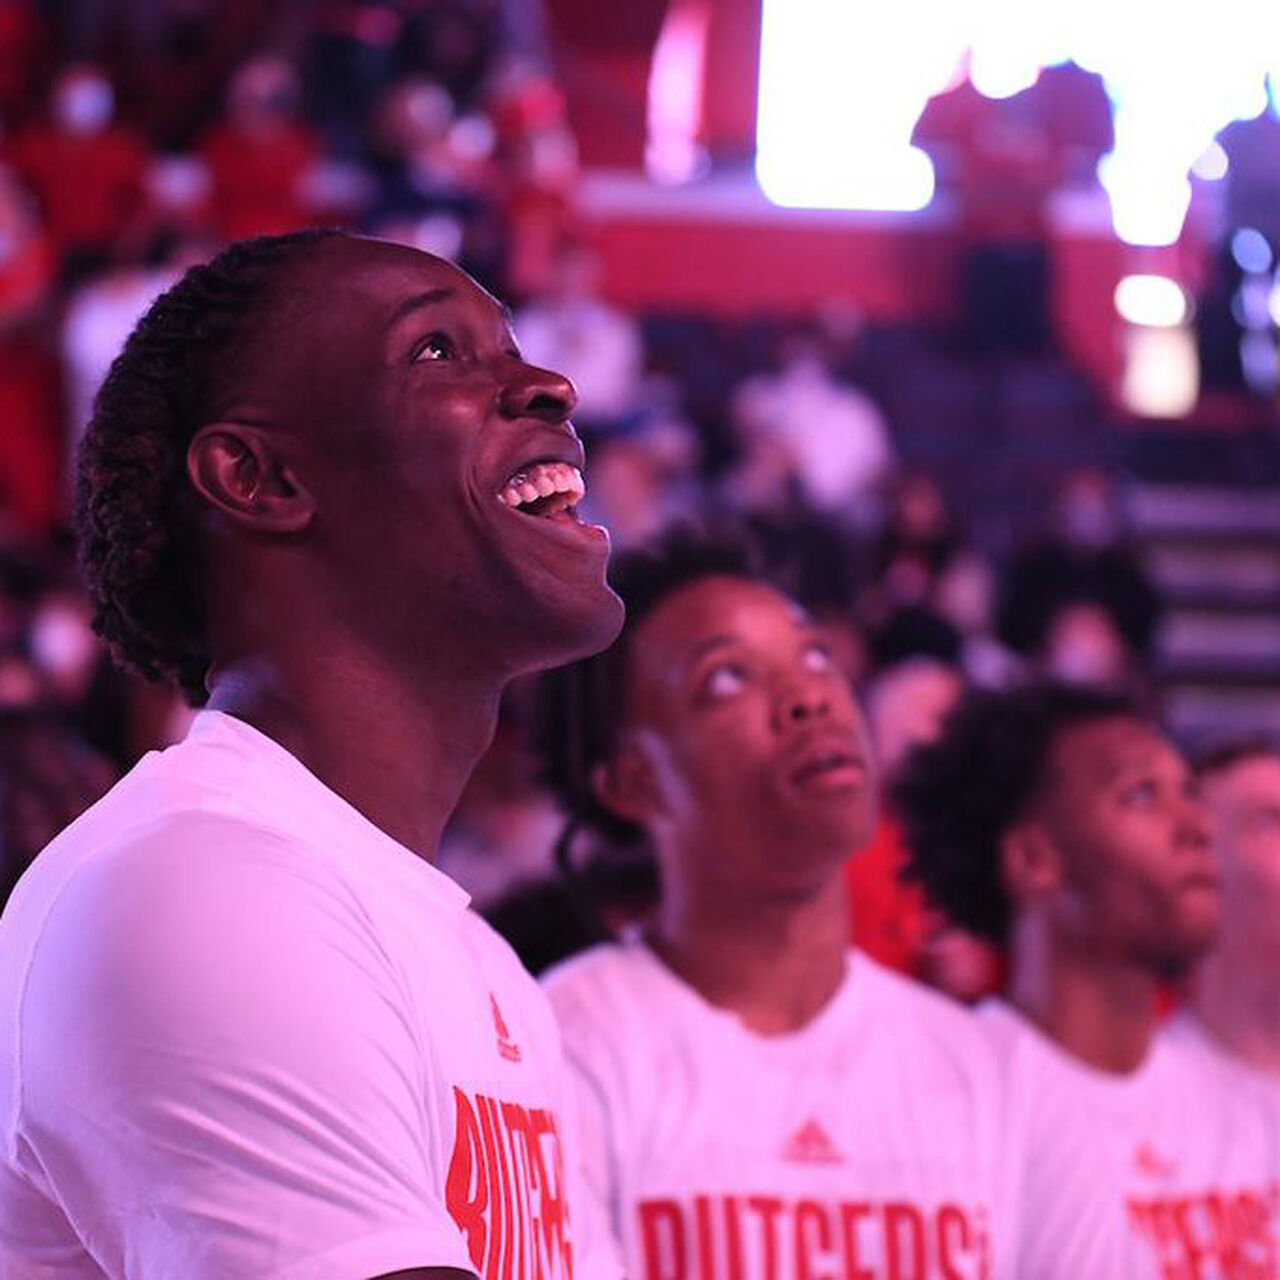 Rutgers Men's Basketball players smiling in Jersey Mike's arena before a game image number 0